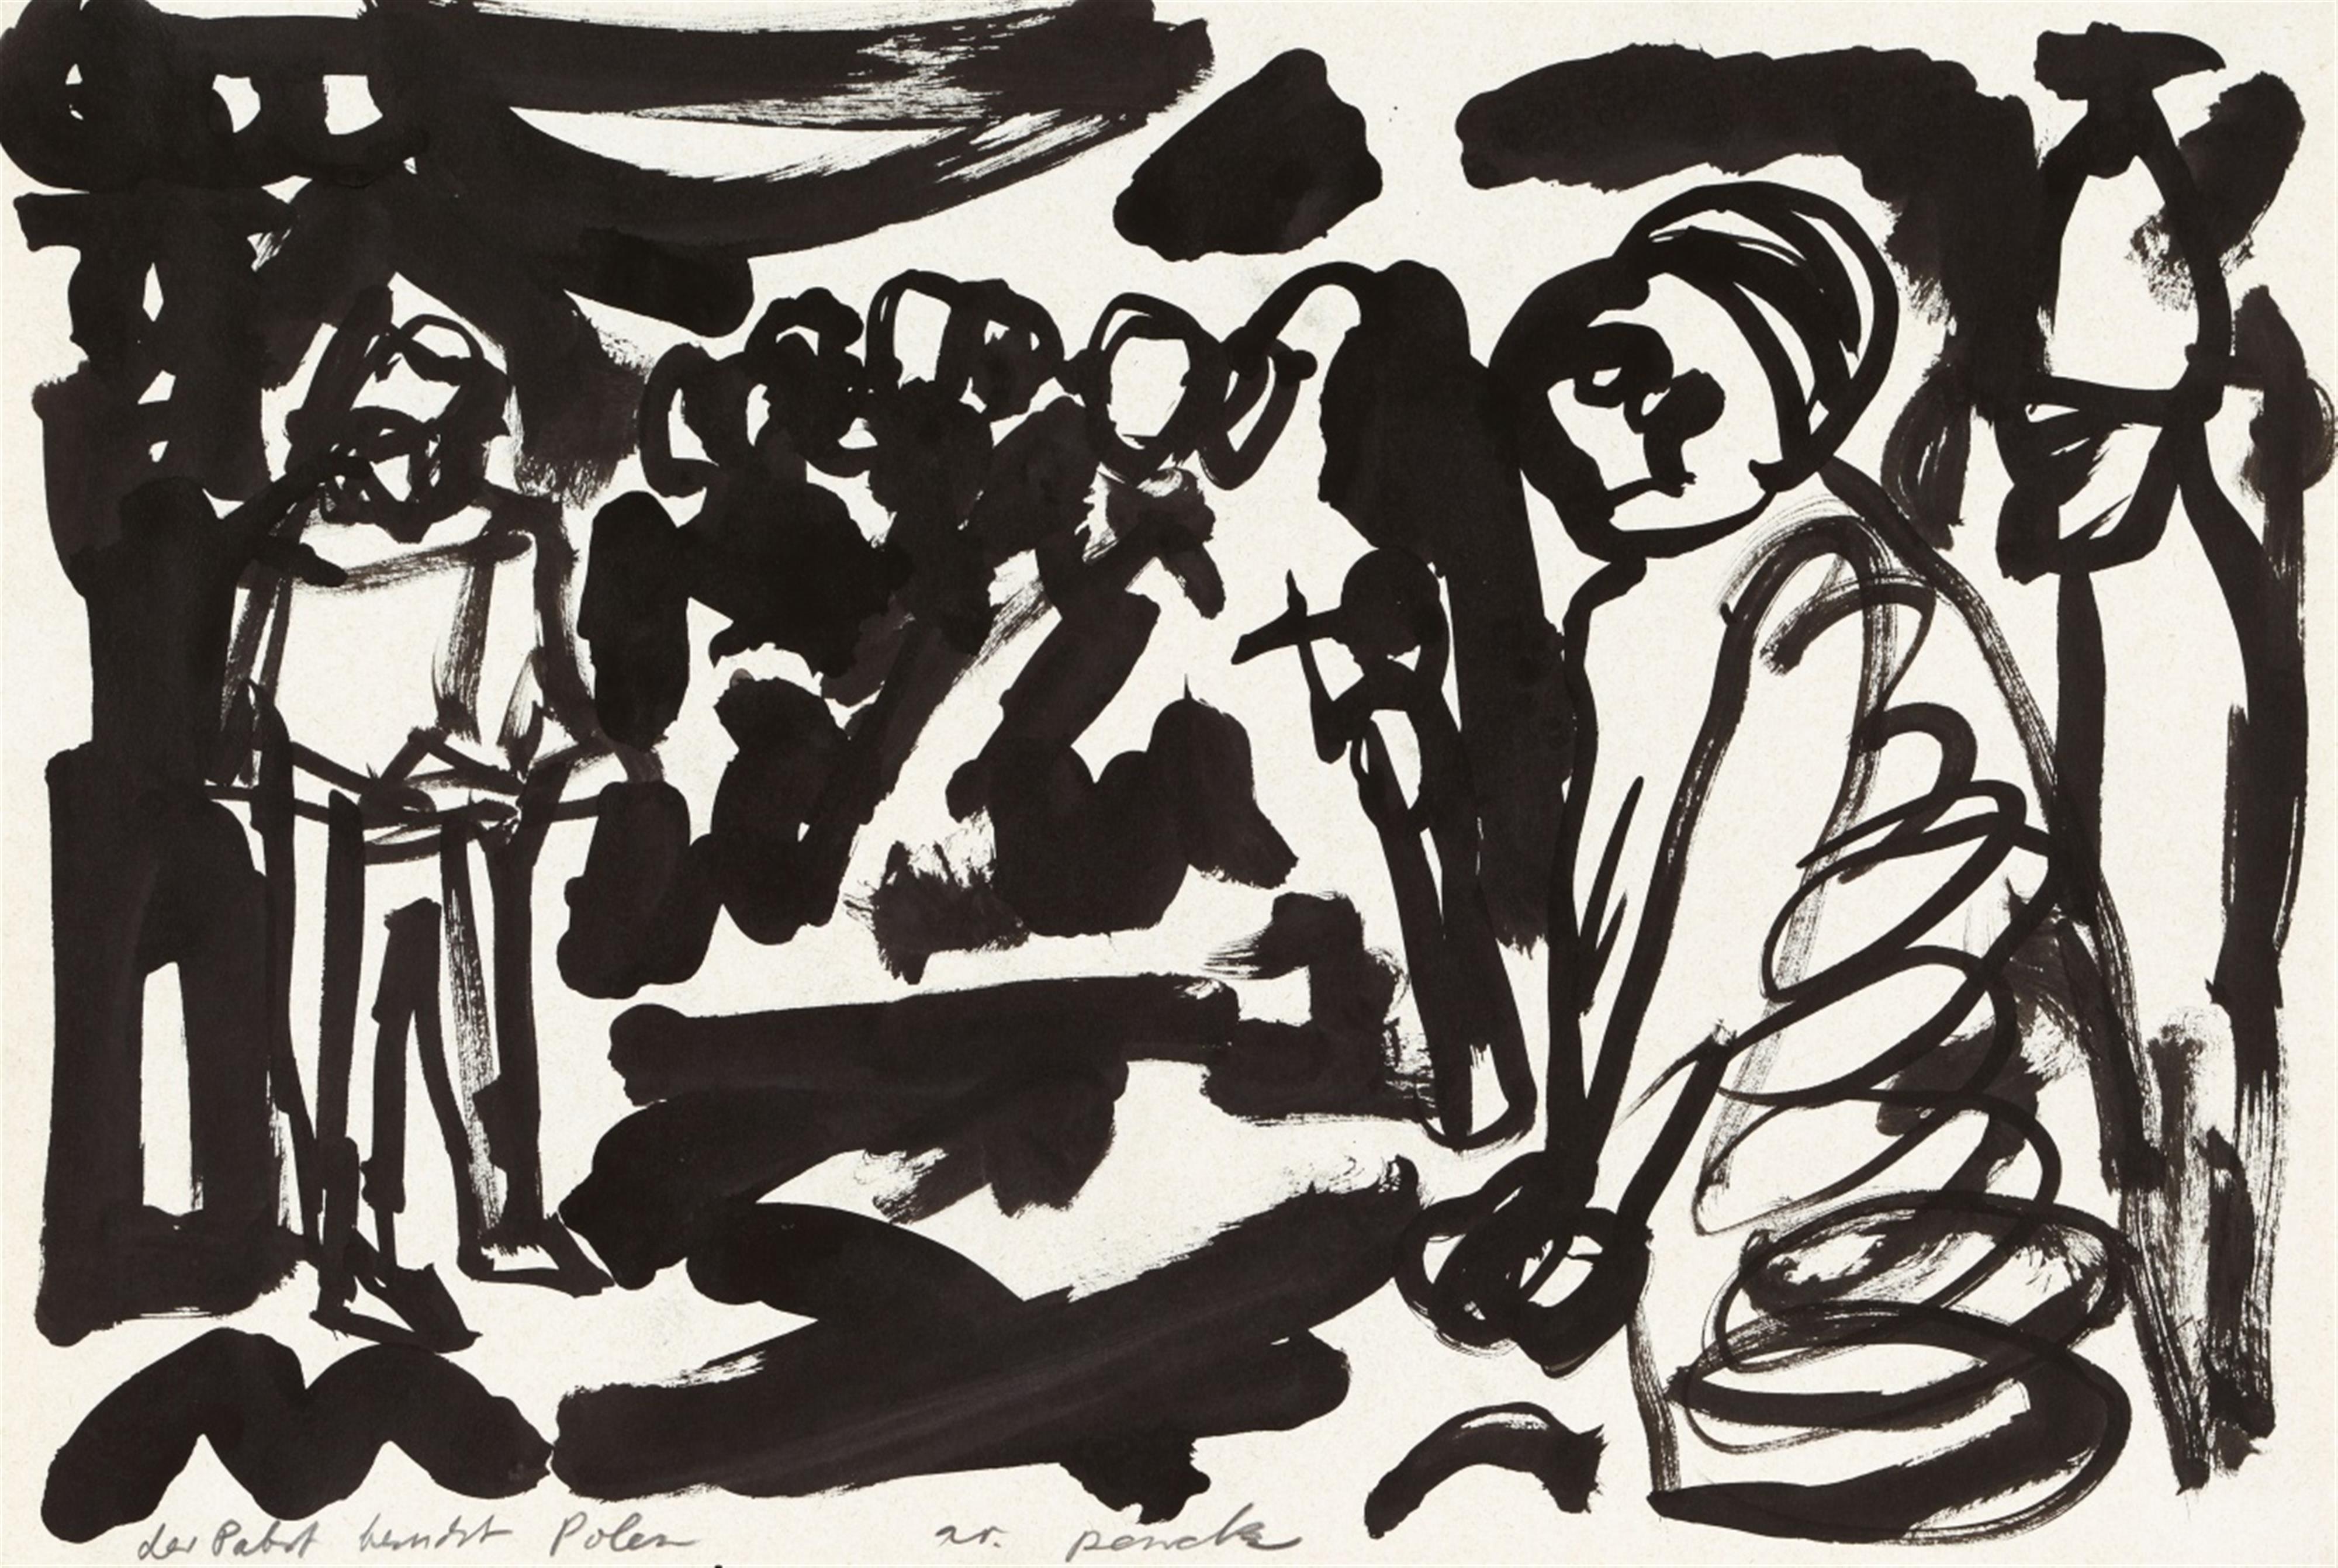 A.R. Penck - Pabst in Polen - image-10